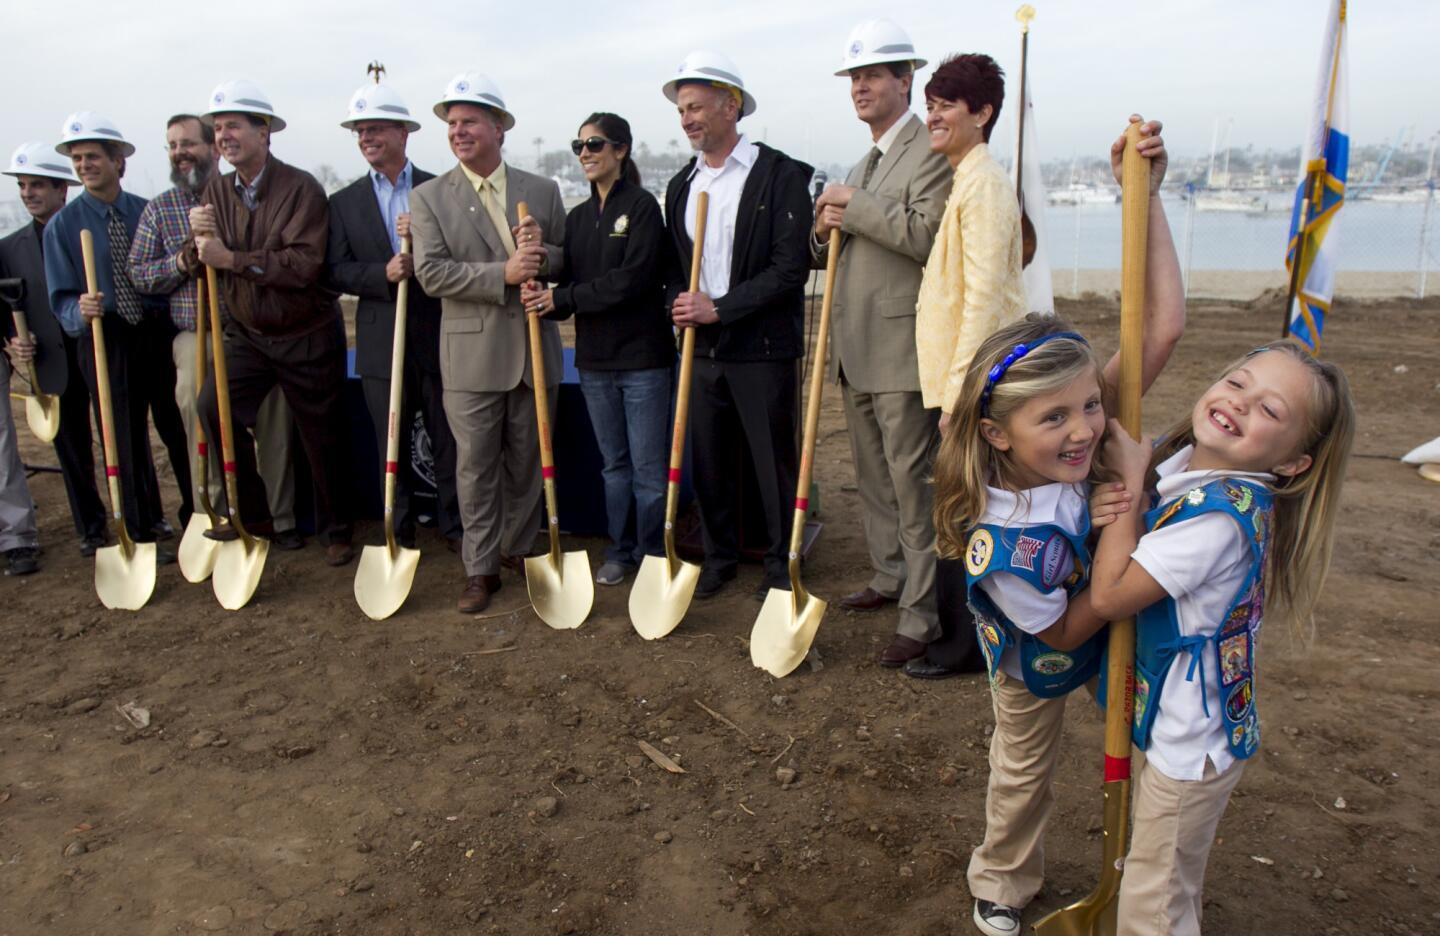 Girl Scouts Frankie Paalman and Kelly Richards pose for a photo op in front of city officials during the groundbreaking ceremony for Marina Park on Balboa Peninsula on Tuesday, February 11. (Scott Smeltzer, Daily Pilot)